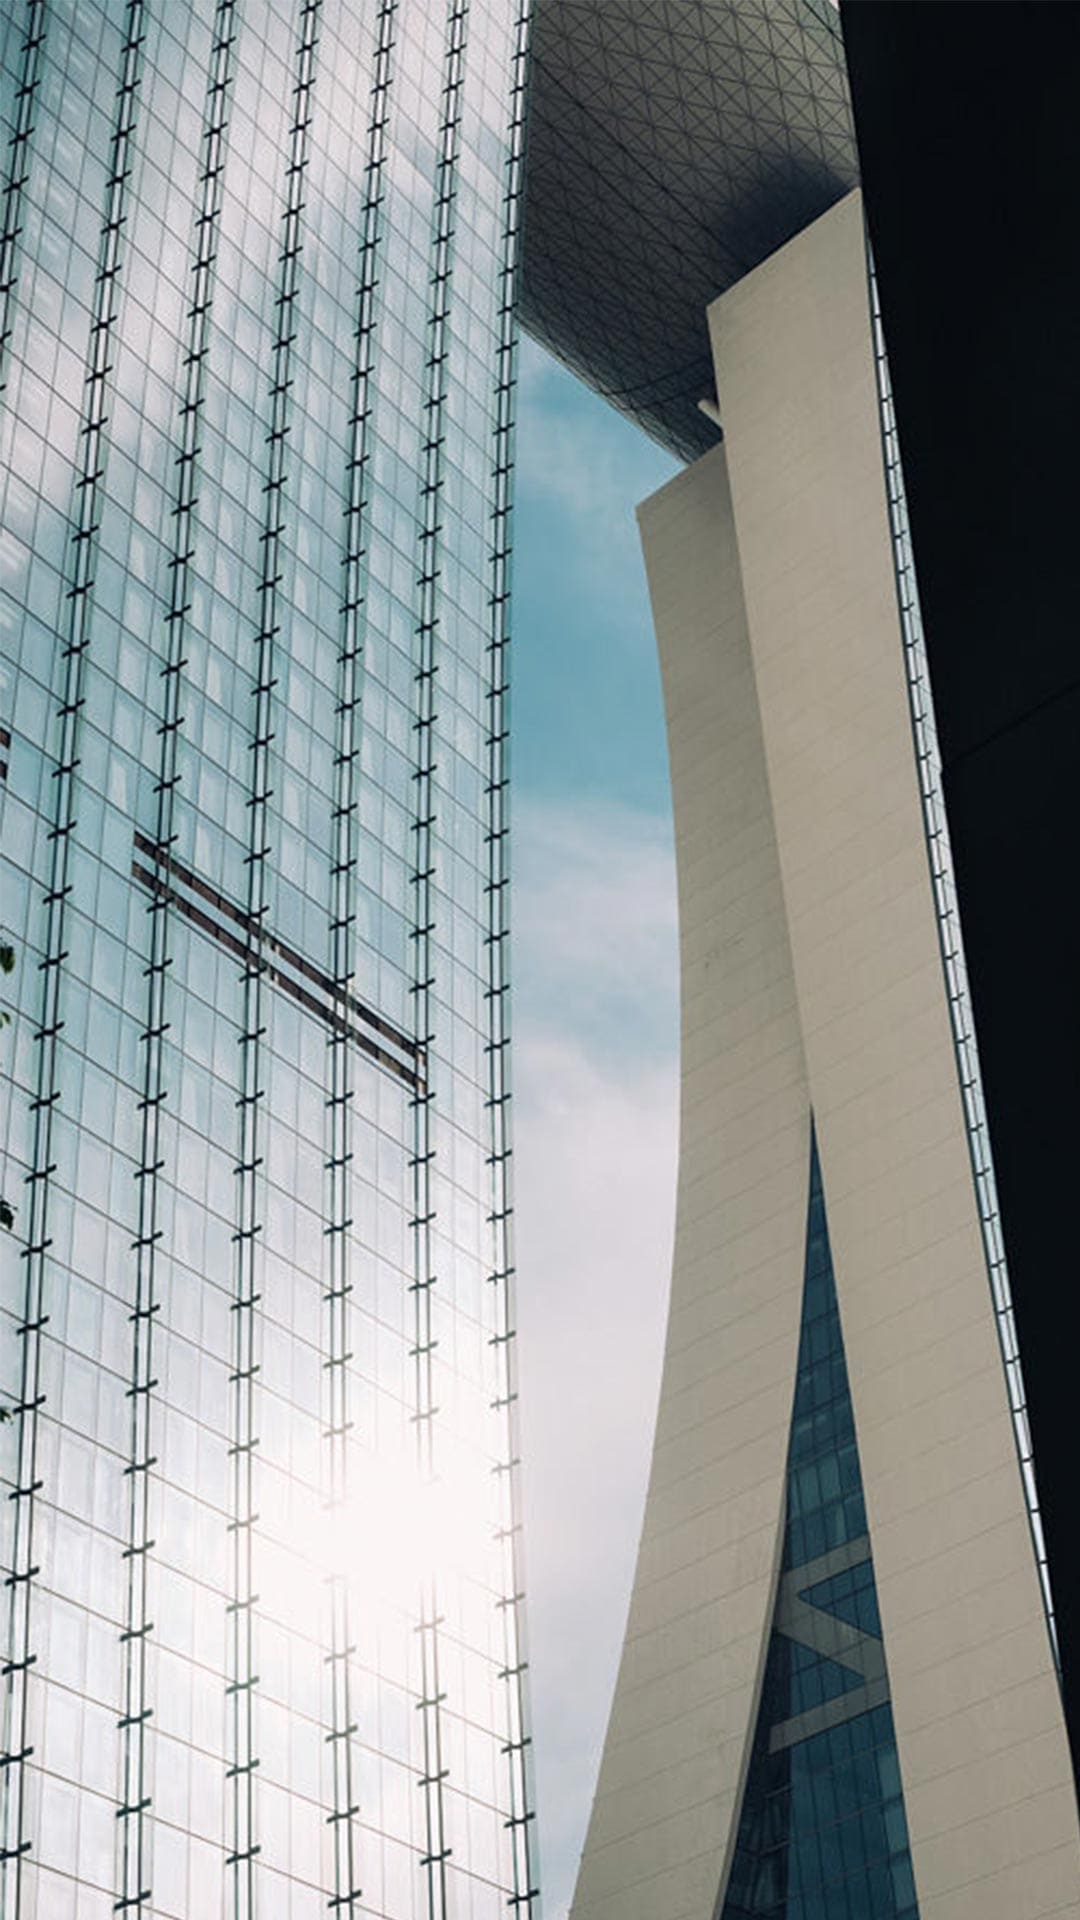 Close up shot of the exterior curved architectural structure of Marina Bay Sands, Singapore